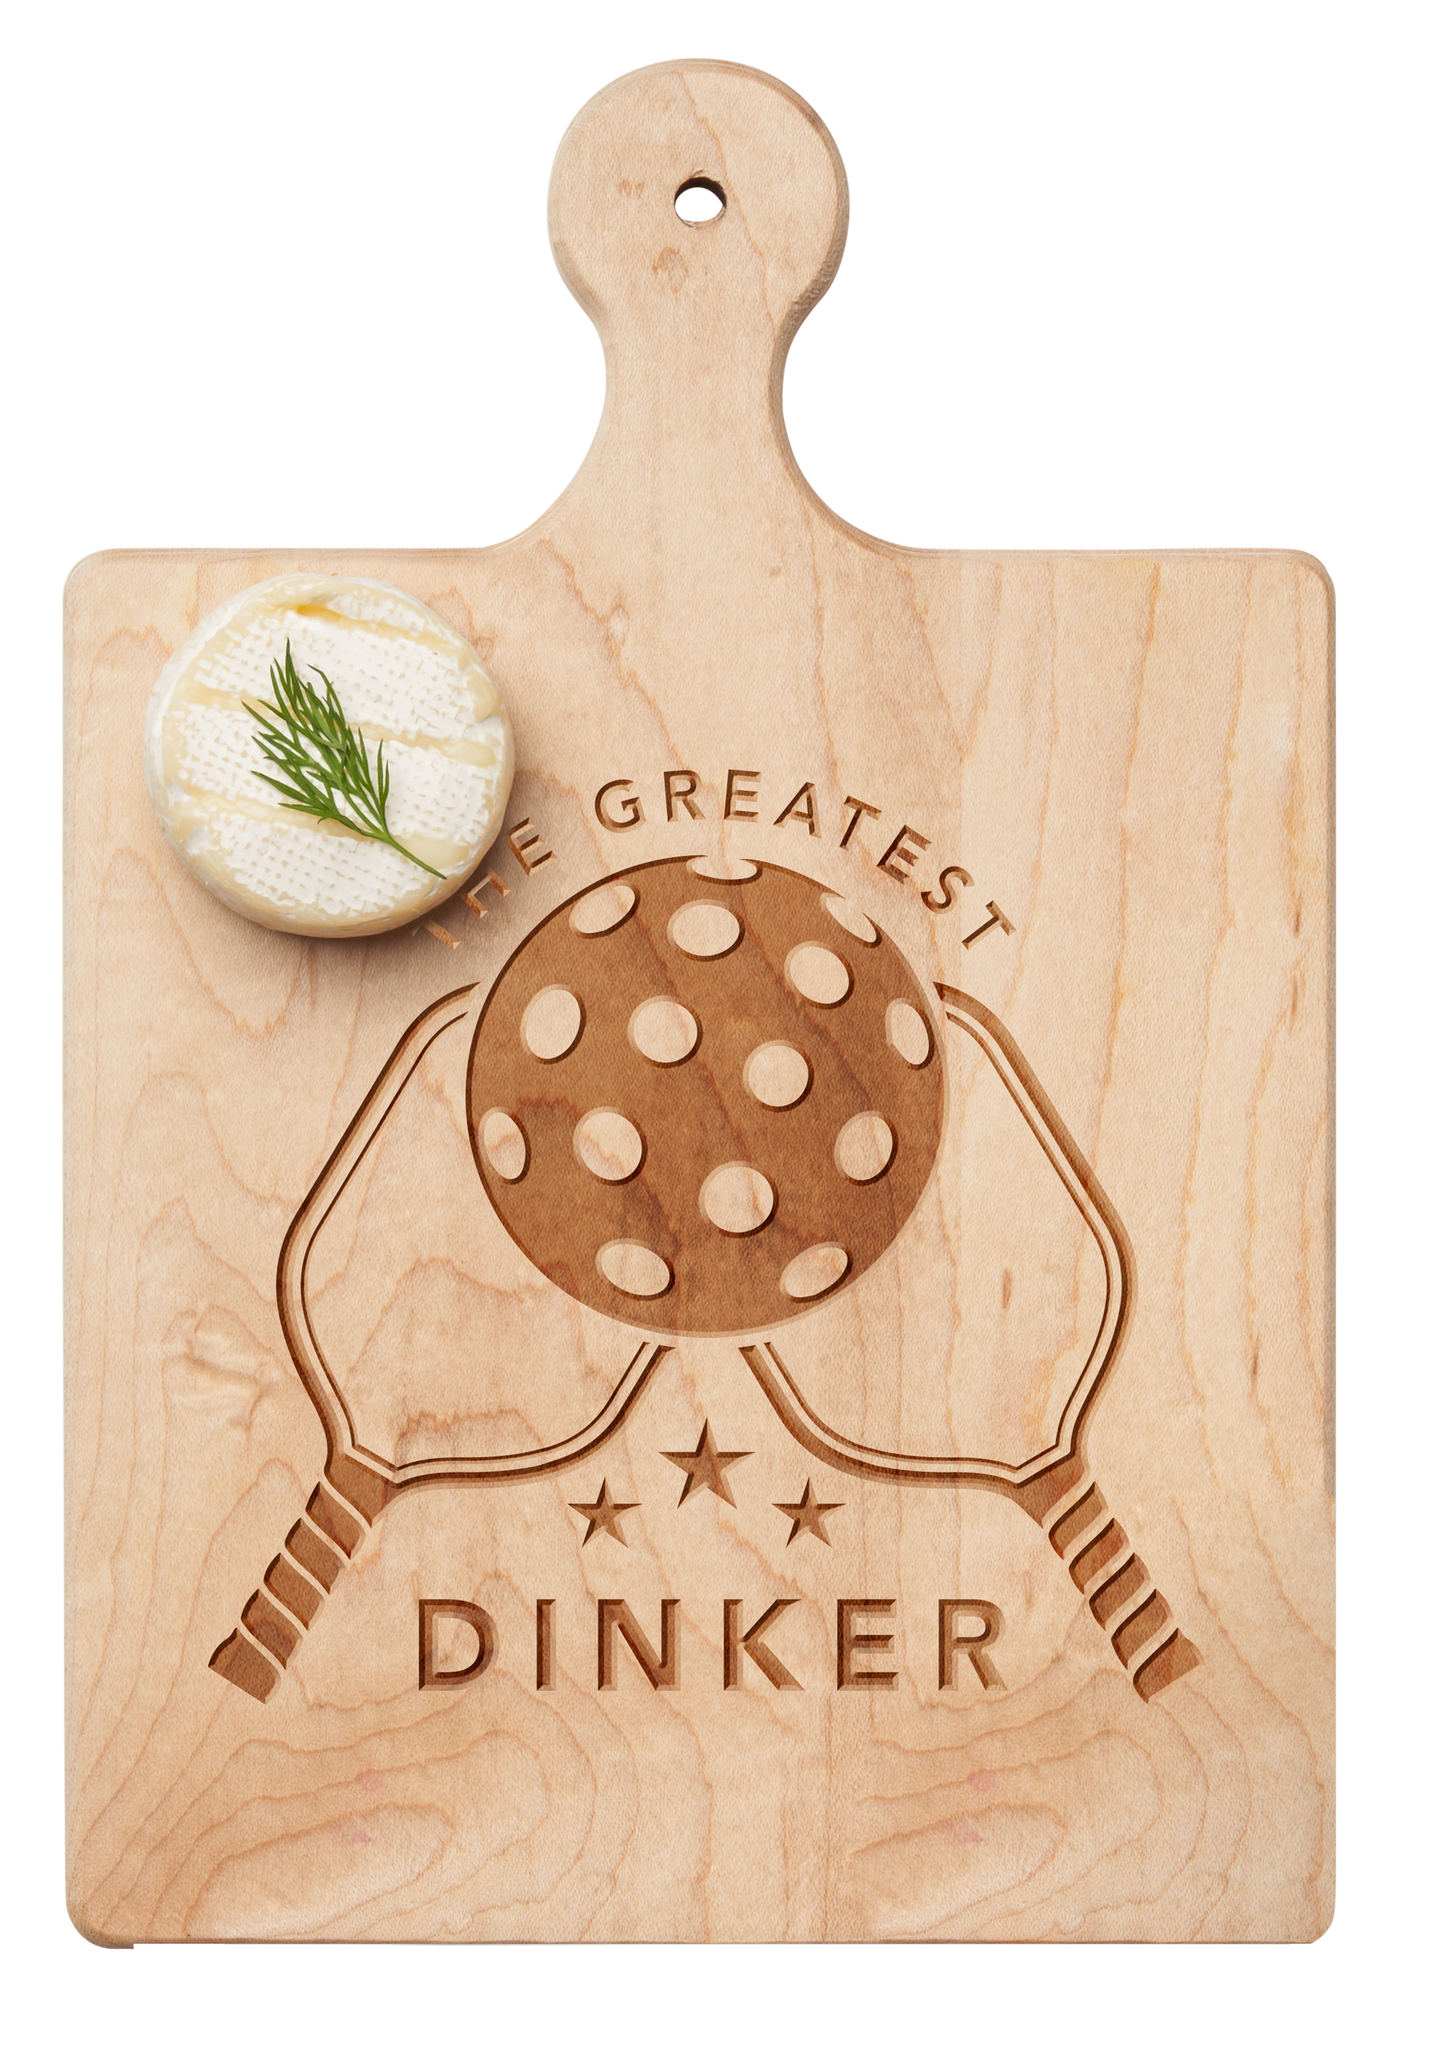 Artisan Maple Paddle Board | The Greatest Dinker | 9" x 6" cheese board